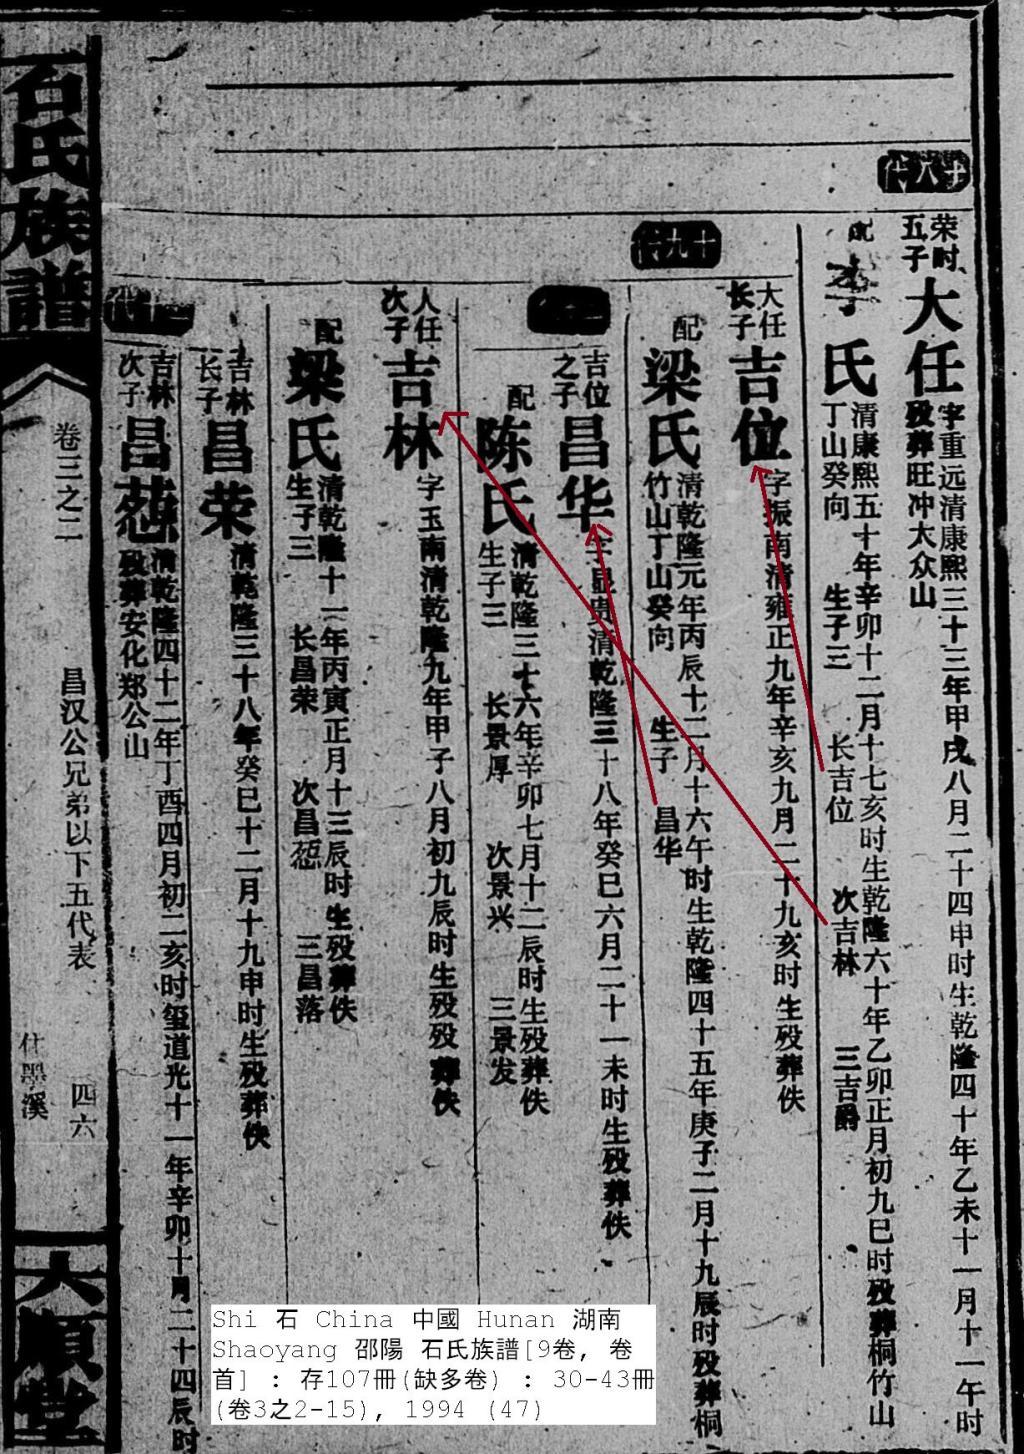 8. Here we have a Shi family genealogical table beginning with Da ren and his wife of the Li clan in the 18 th generation.